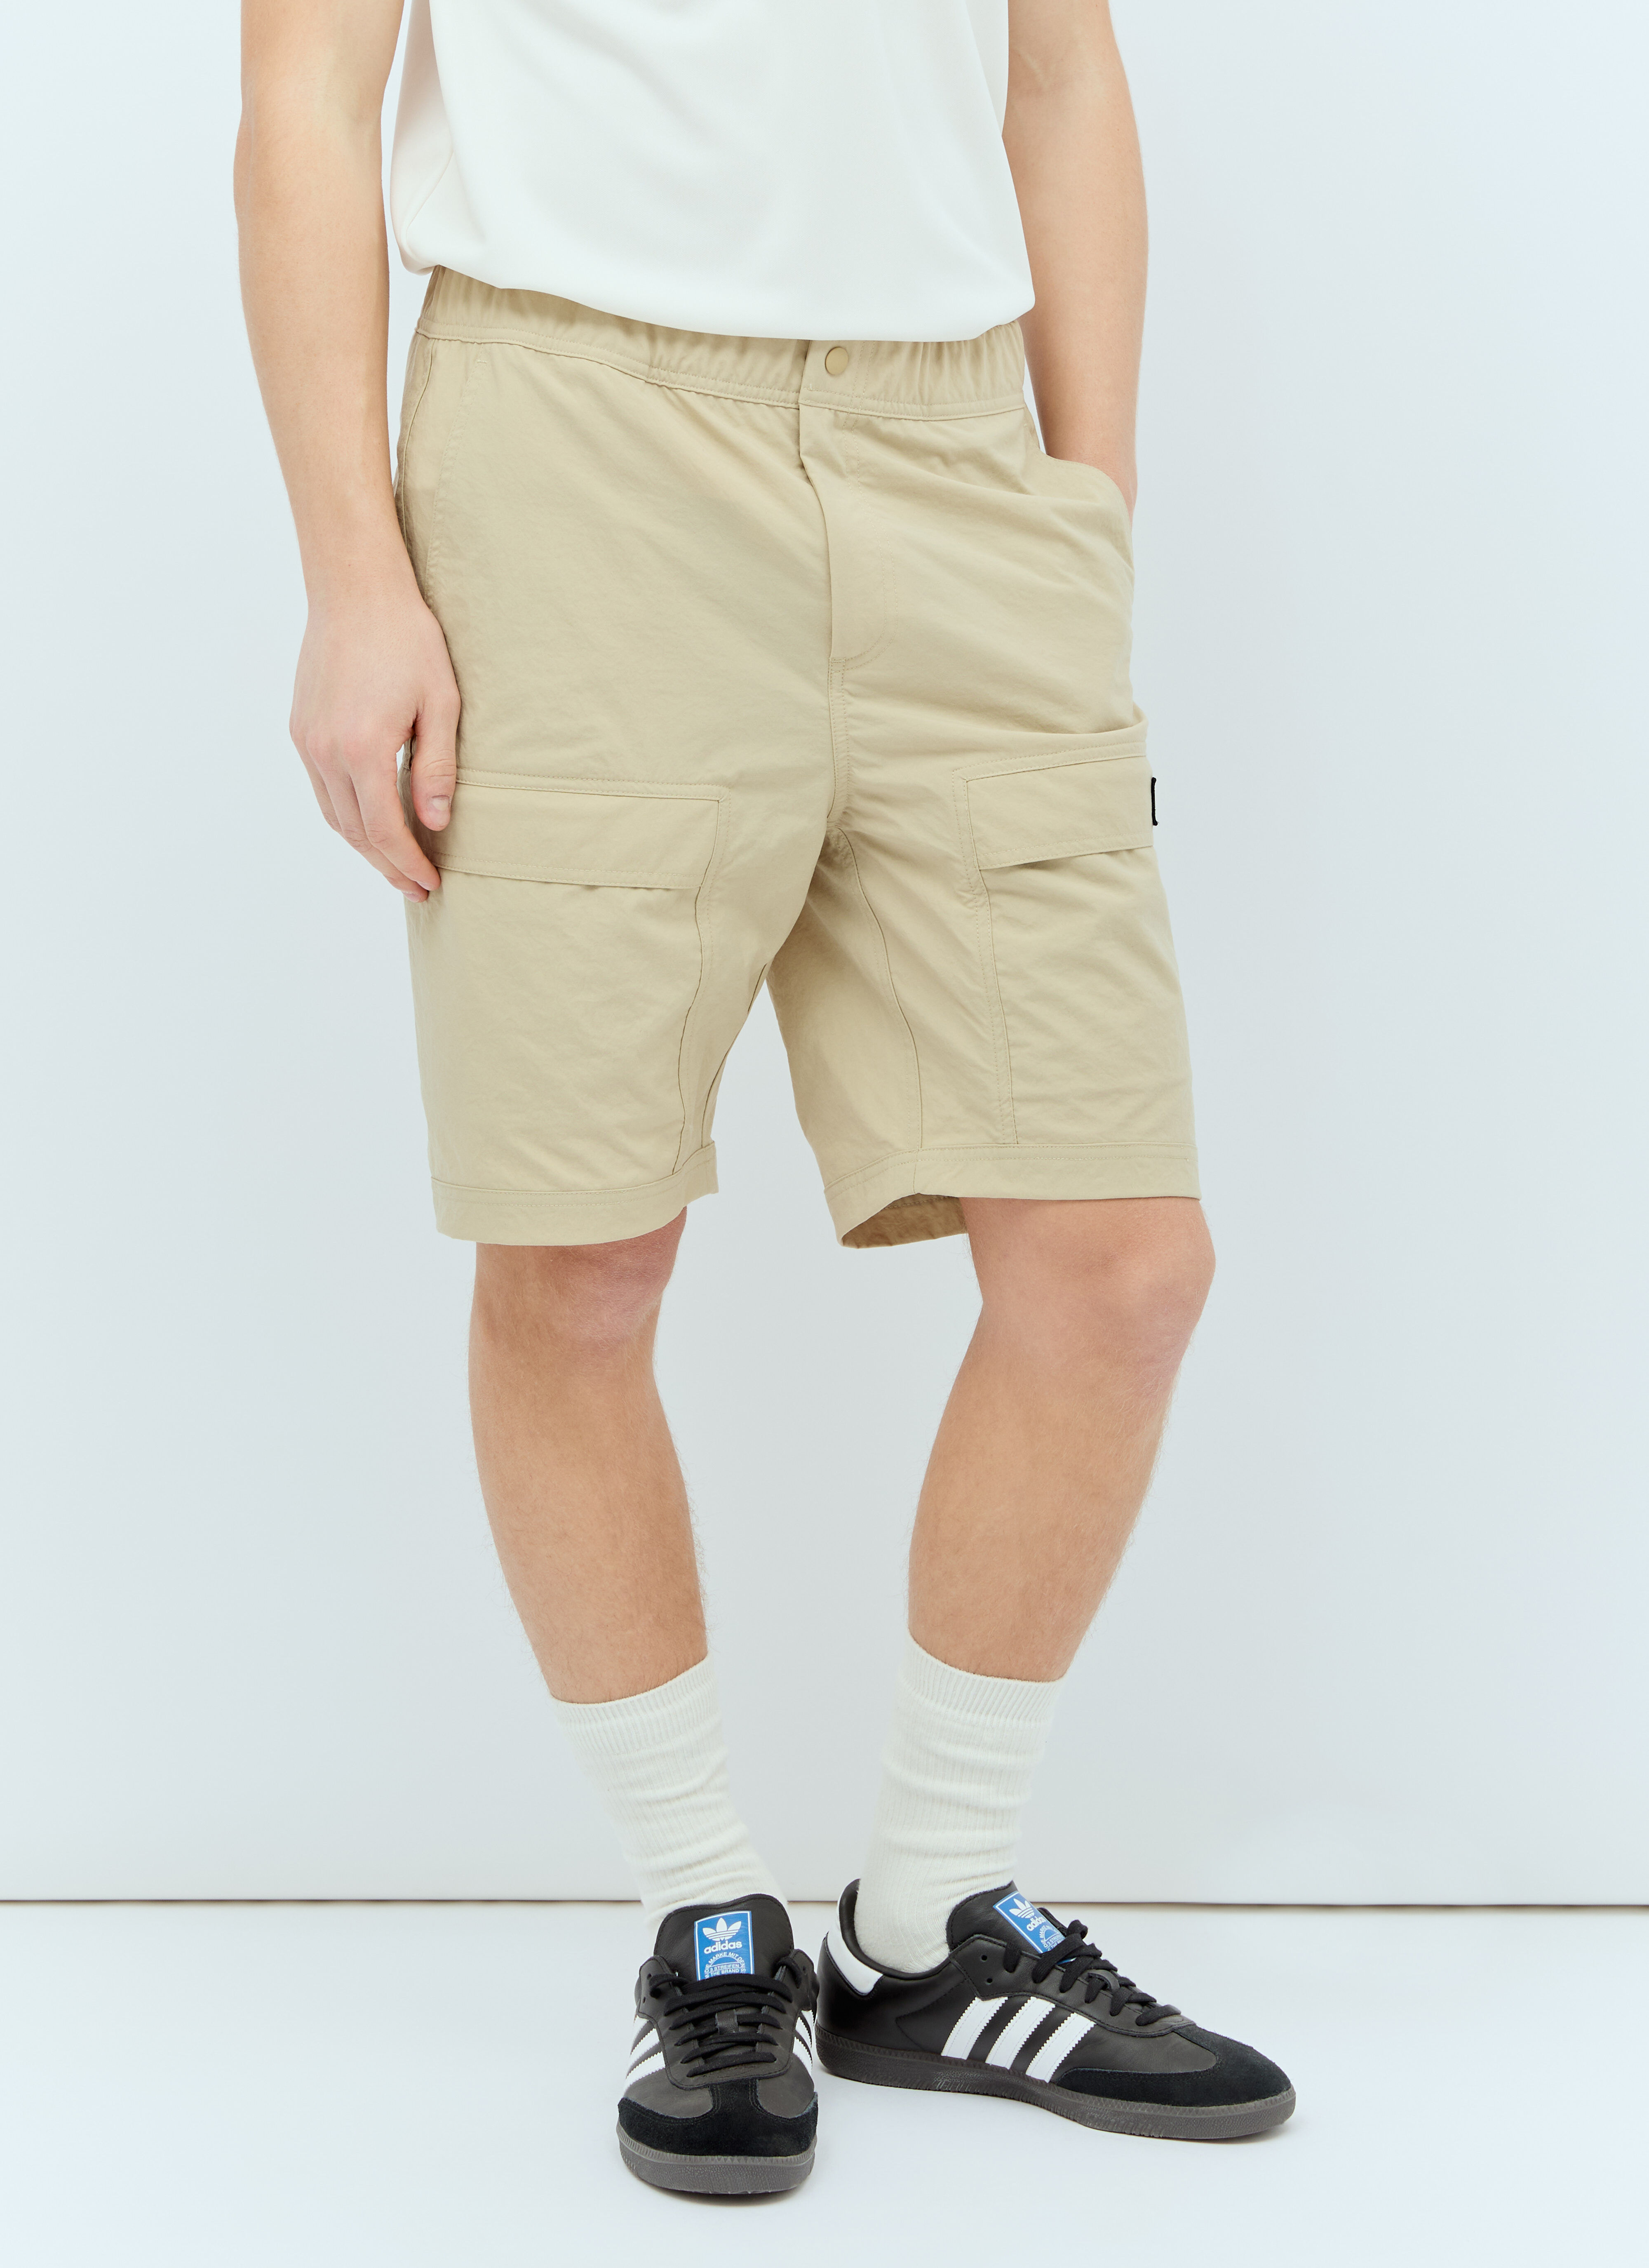 adidas by Wales Bonner Logo Patch Cargo Shorts Beige awb0357003